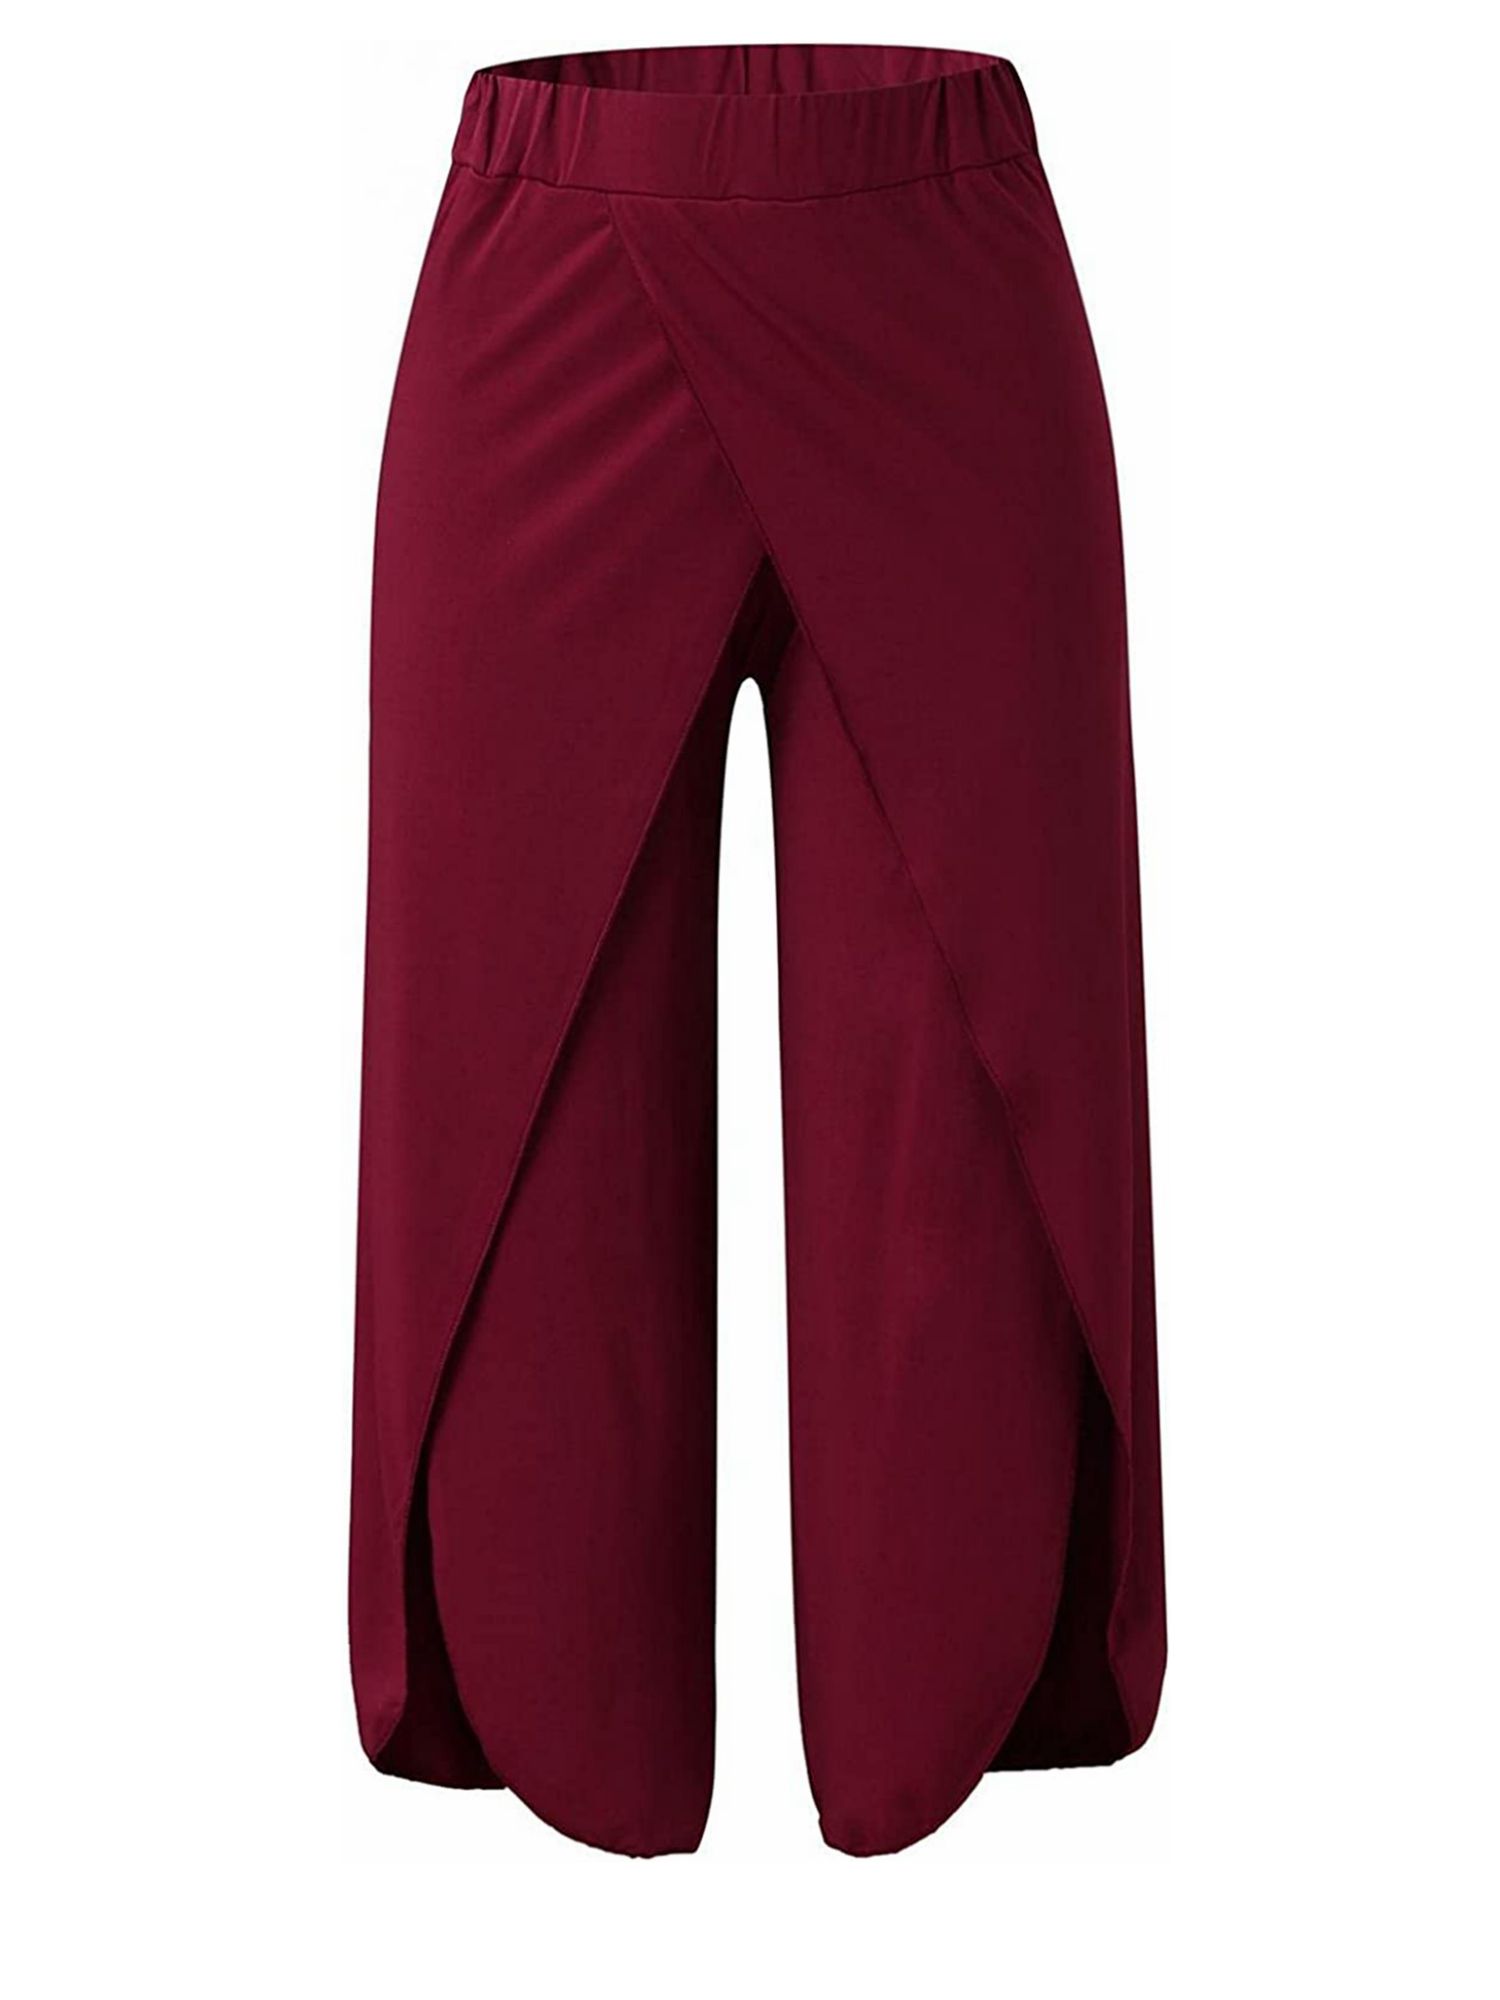 Fashion Black Wine Red Loose Wide Leg Pants Women Elastic High Waisted  Streetwear Burgundy Trousers Womenss Korean Casual Solid Full Length Pant  210619 From Dou02, $16.78